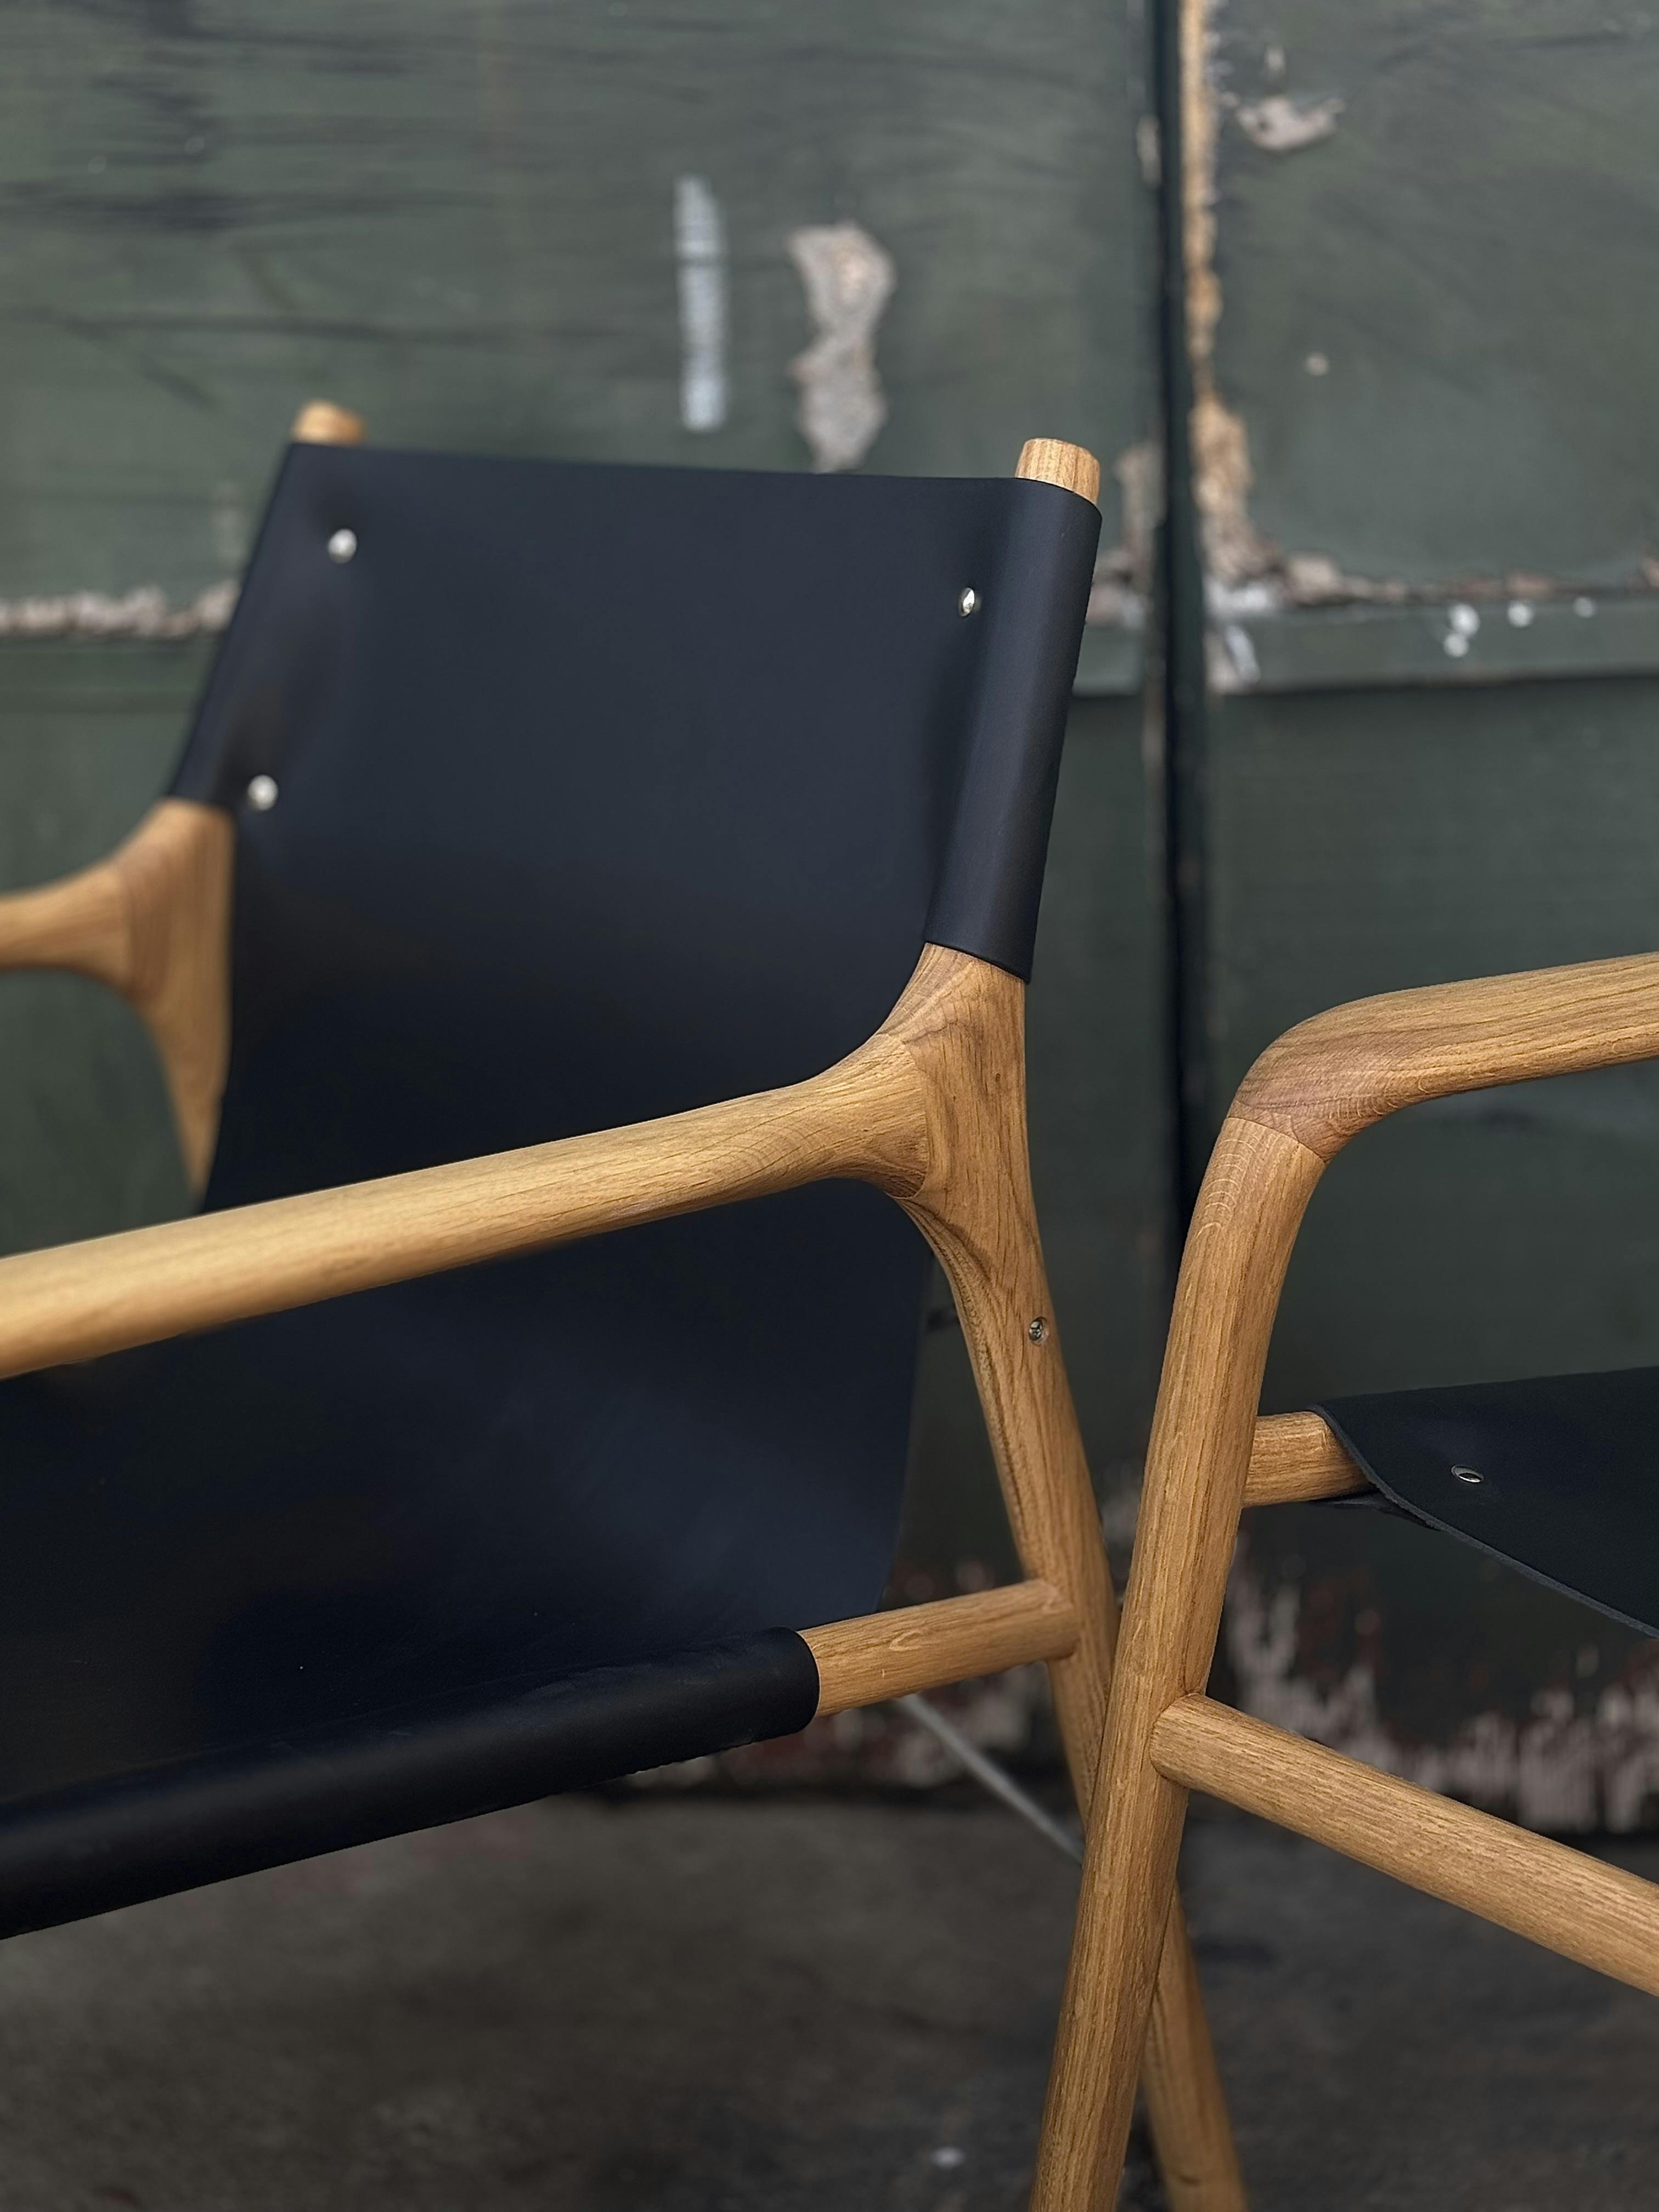 Contemporary Danish leather sling “Soul” Lounge Chair by Bolia